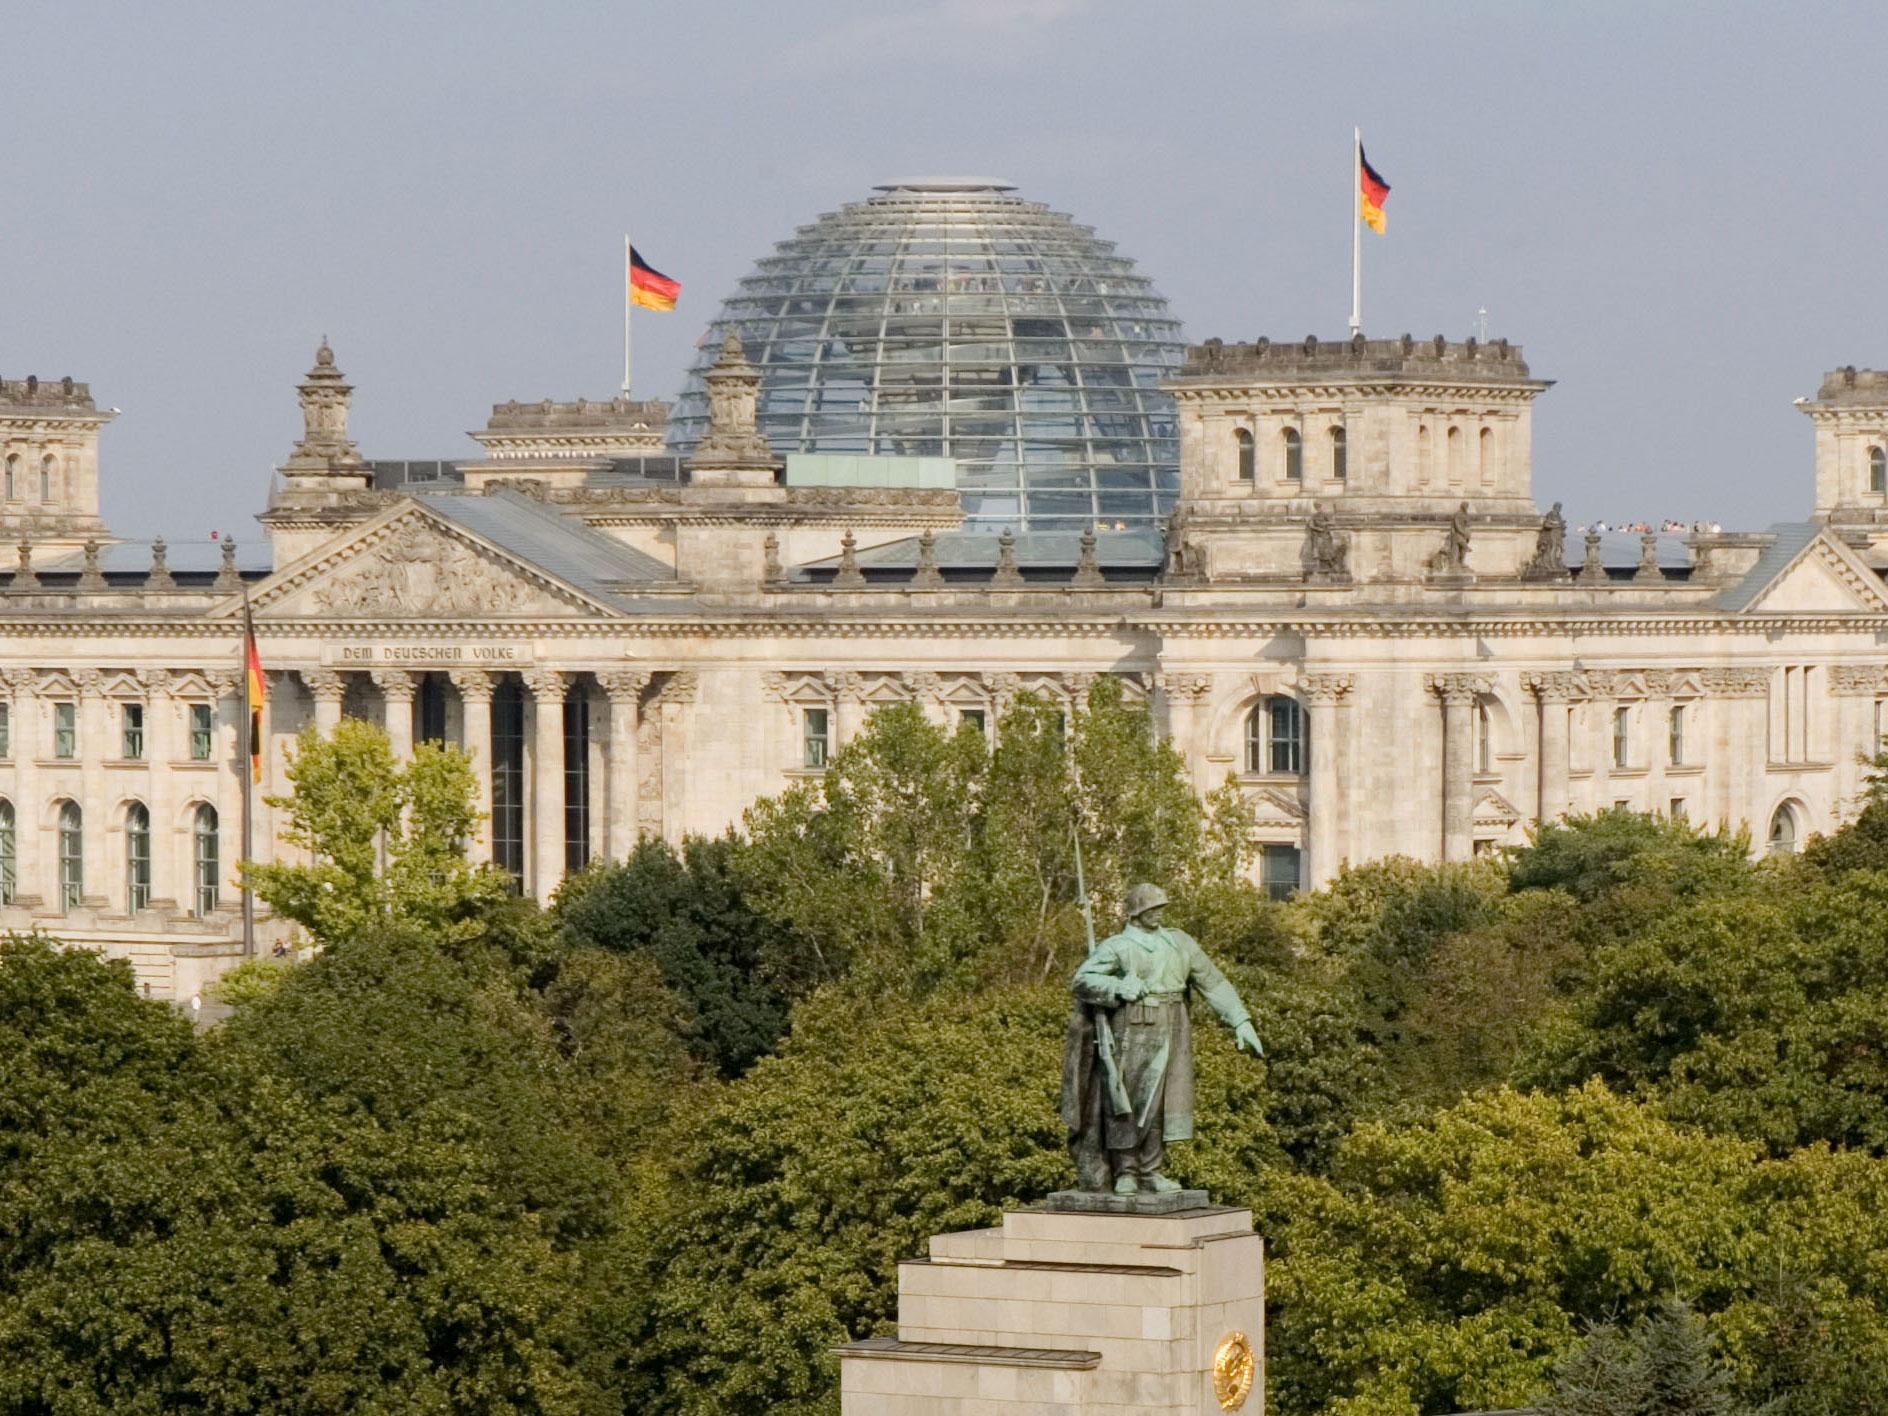 The Reichstag in Berlin. The mocked-up version will give youngsters something true-to-life to attack